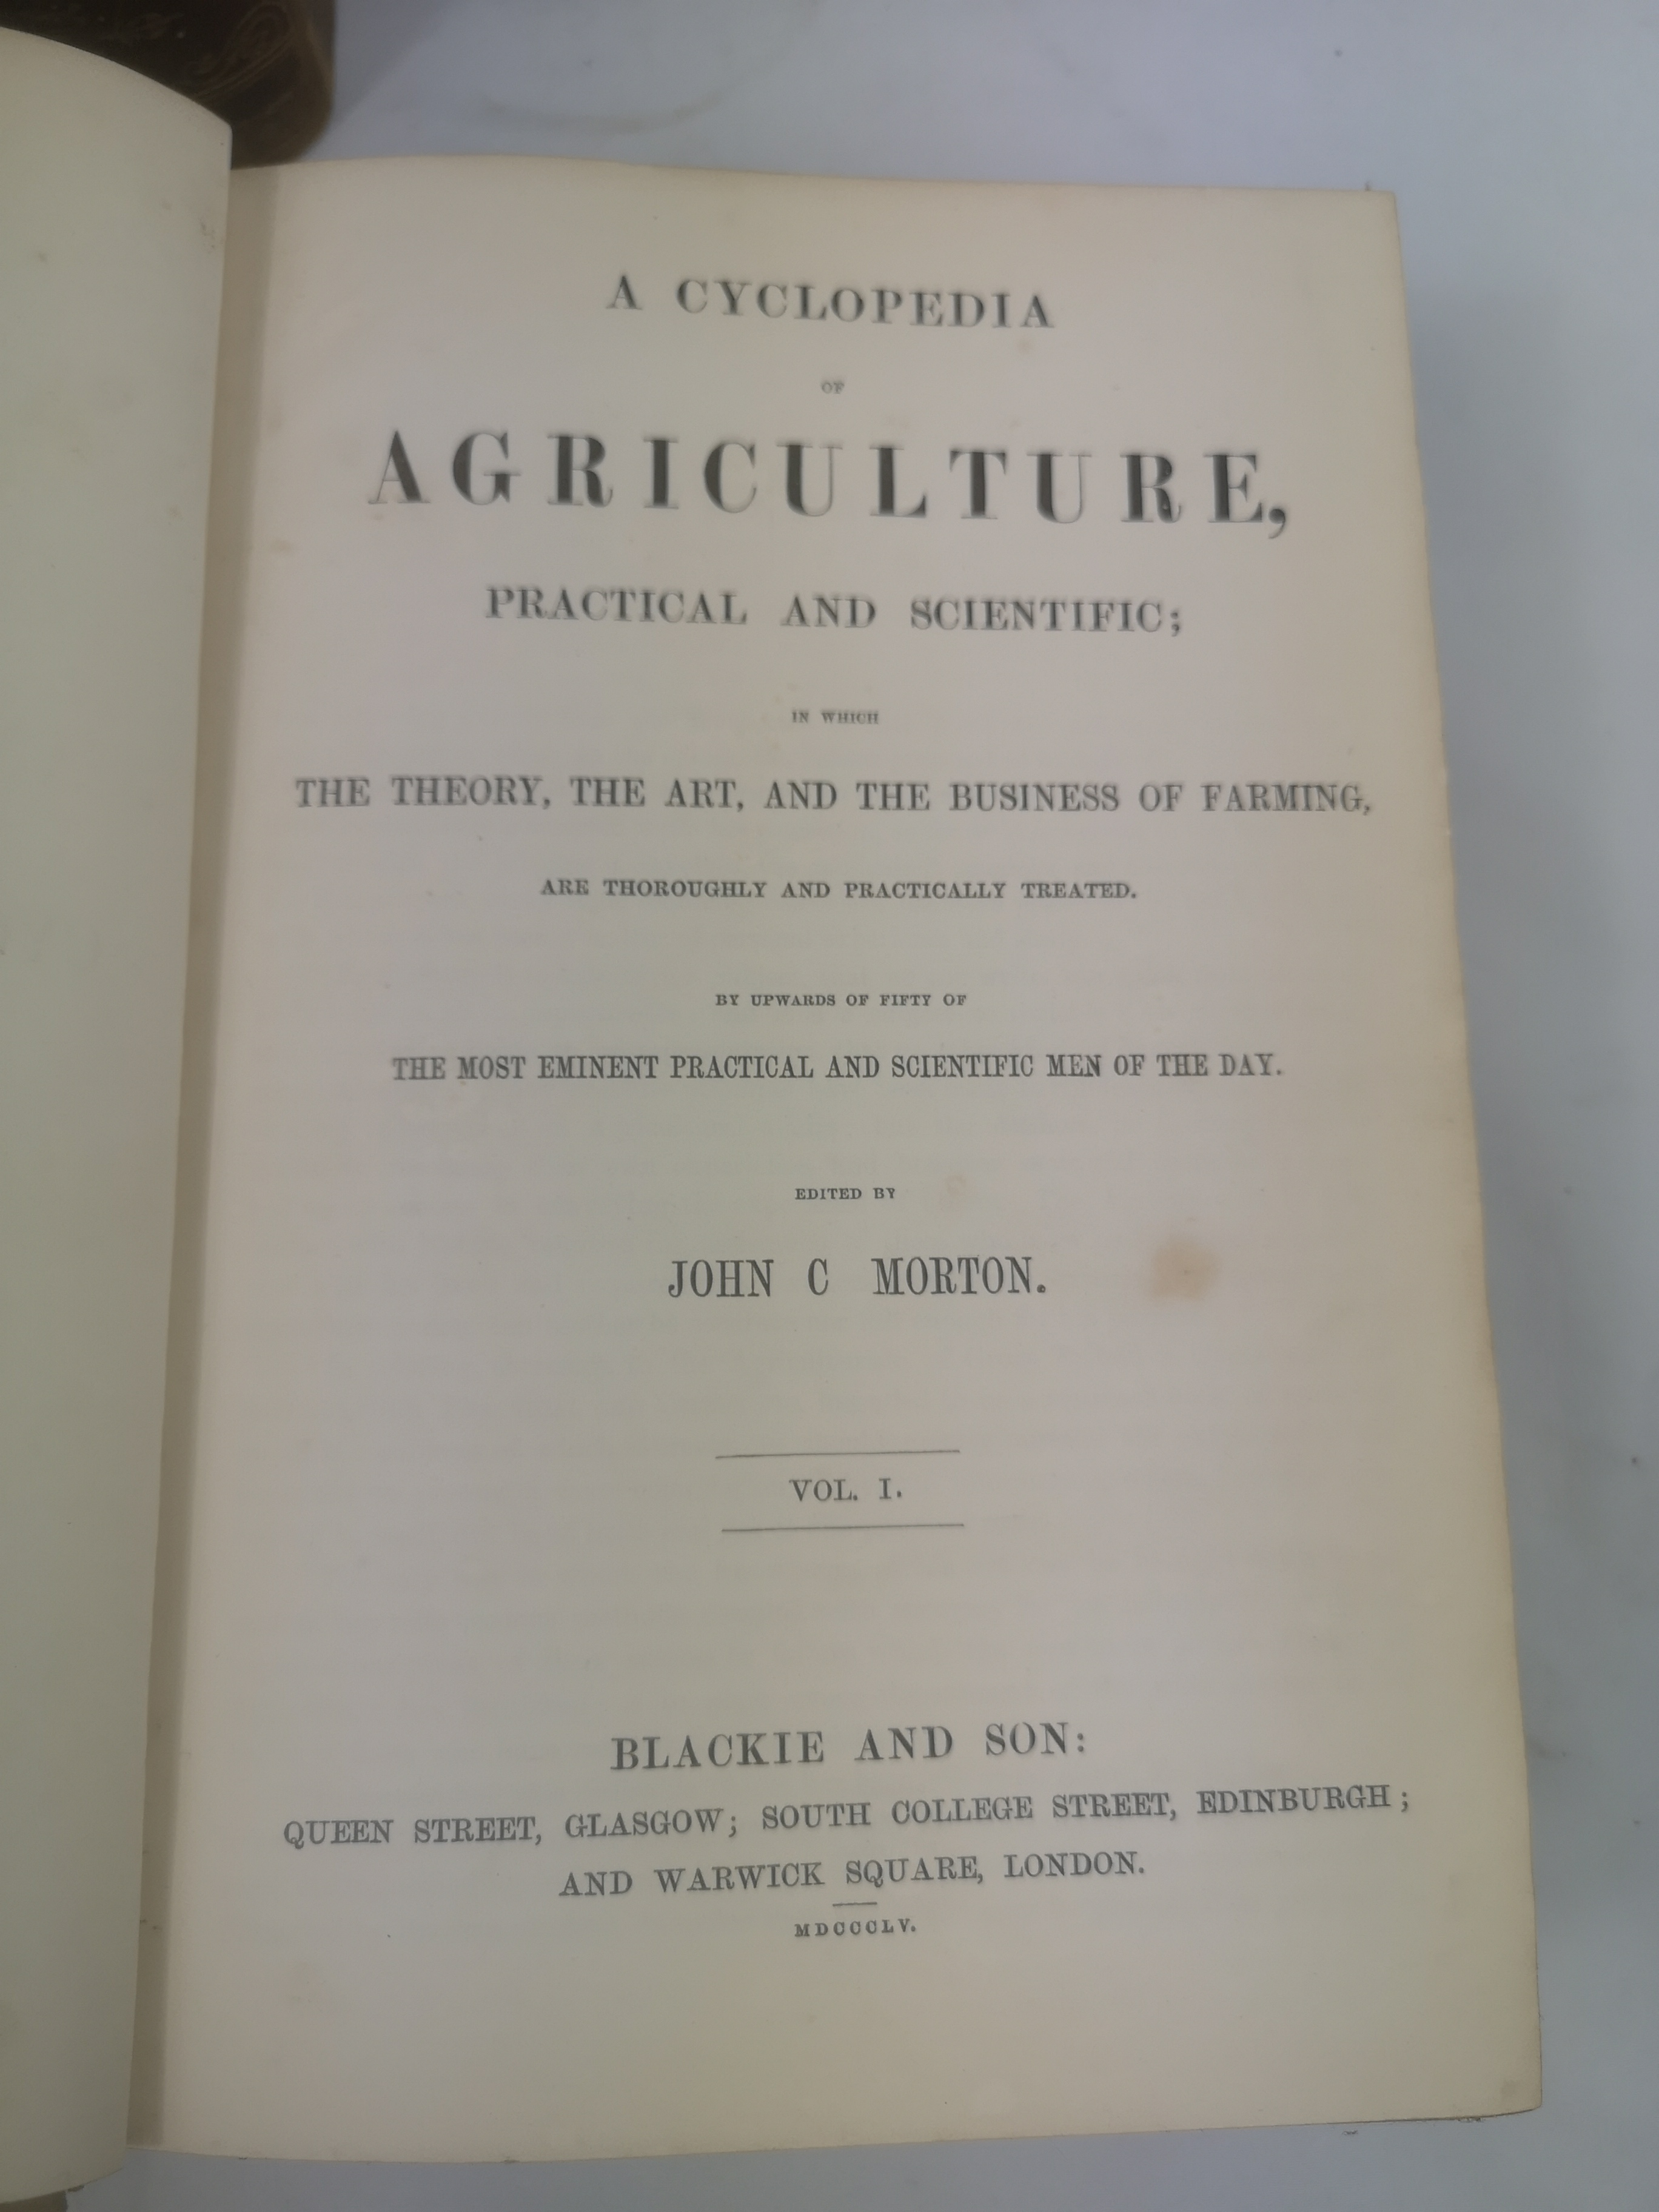 A Cyclopedia of Agriculture edited by John Moreton - Image 2 of 6